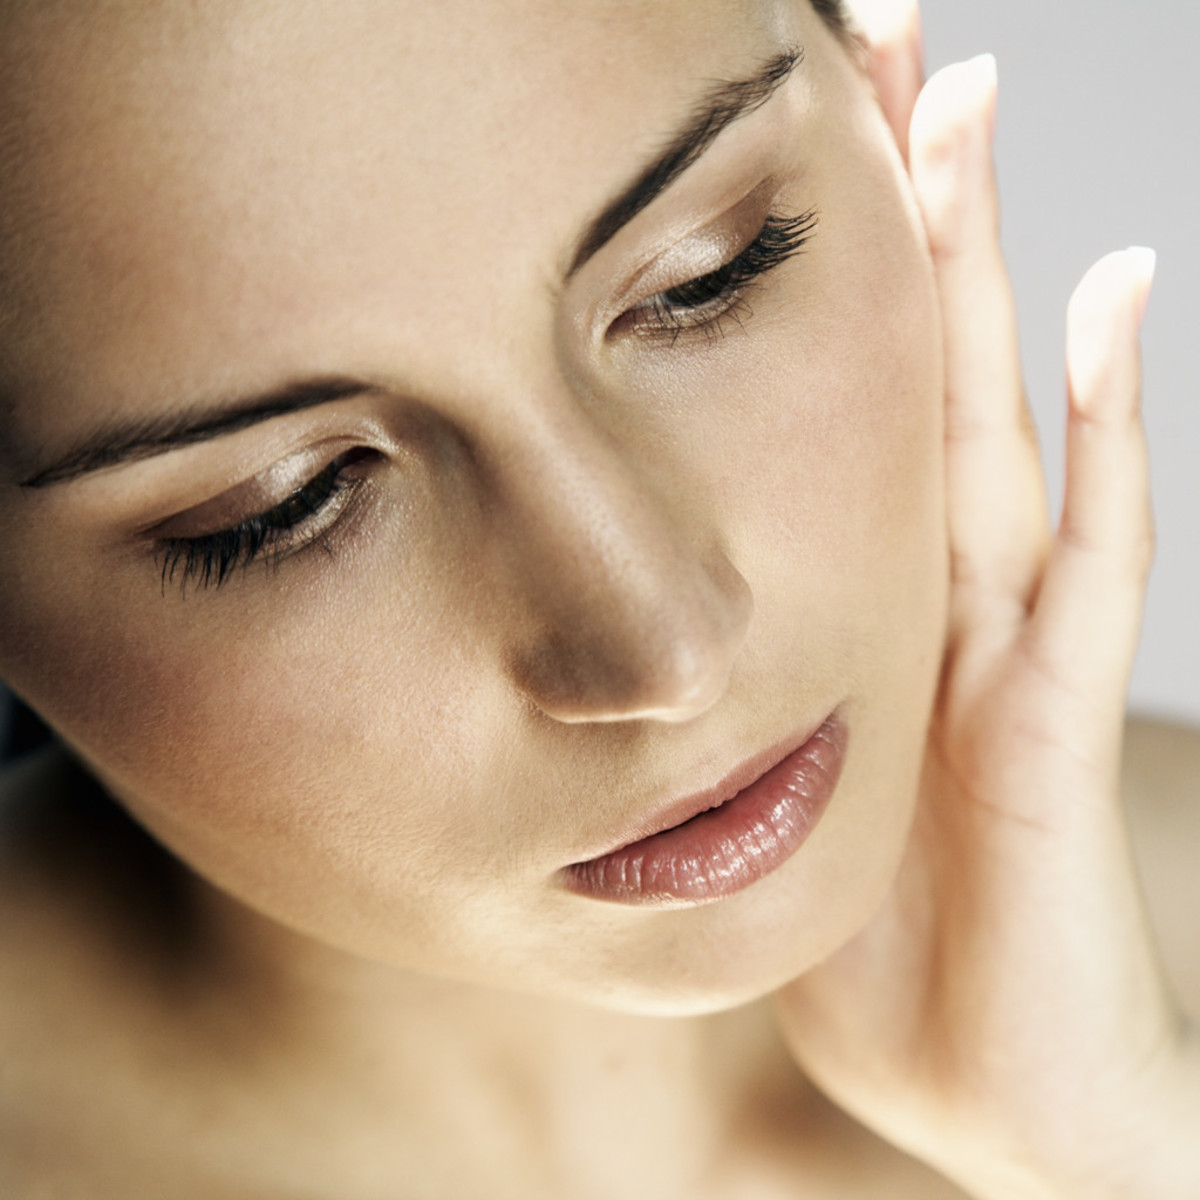 facial-excercises-to-reduce-wrinkles